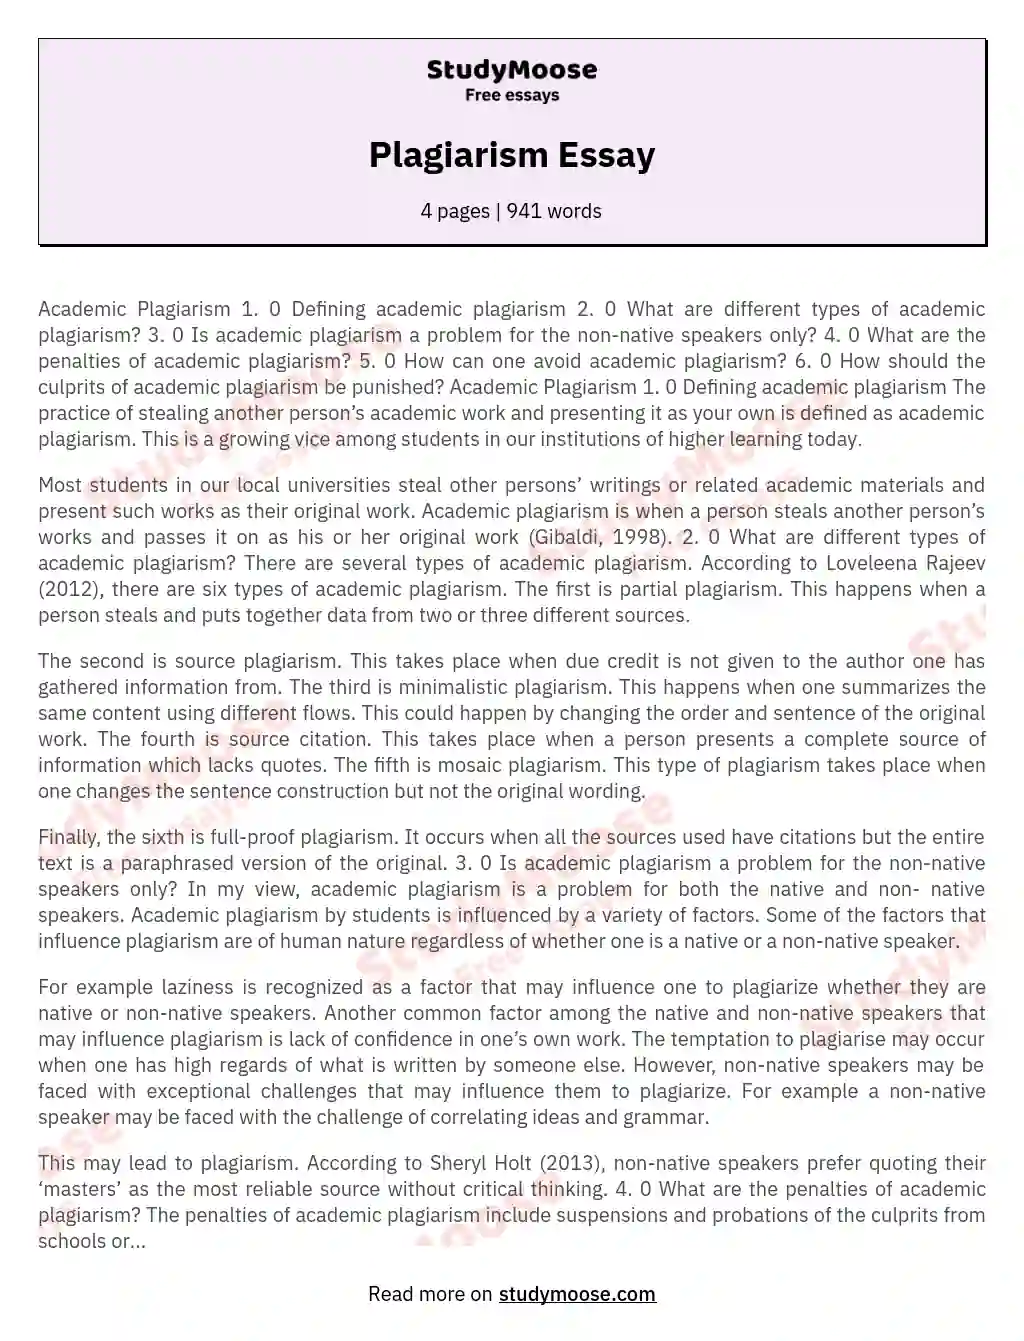 introduction of plagiarism essay